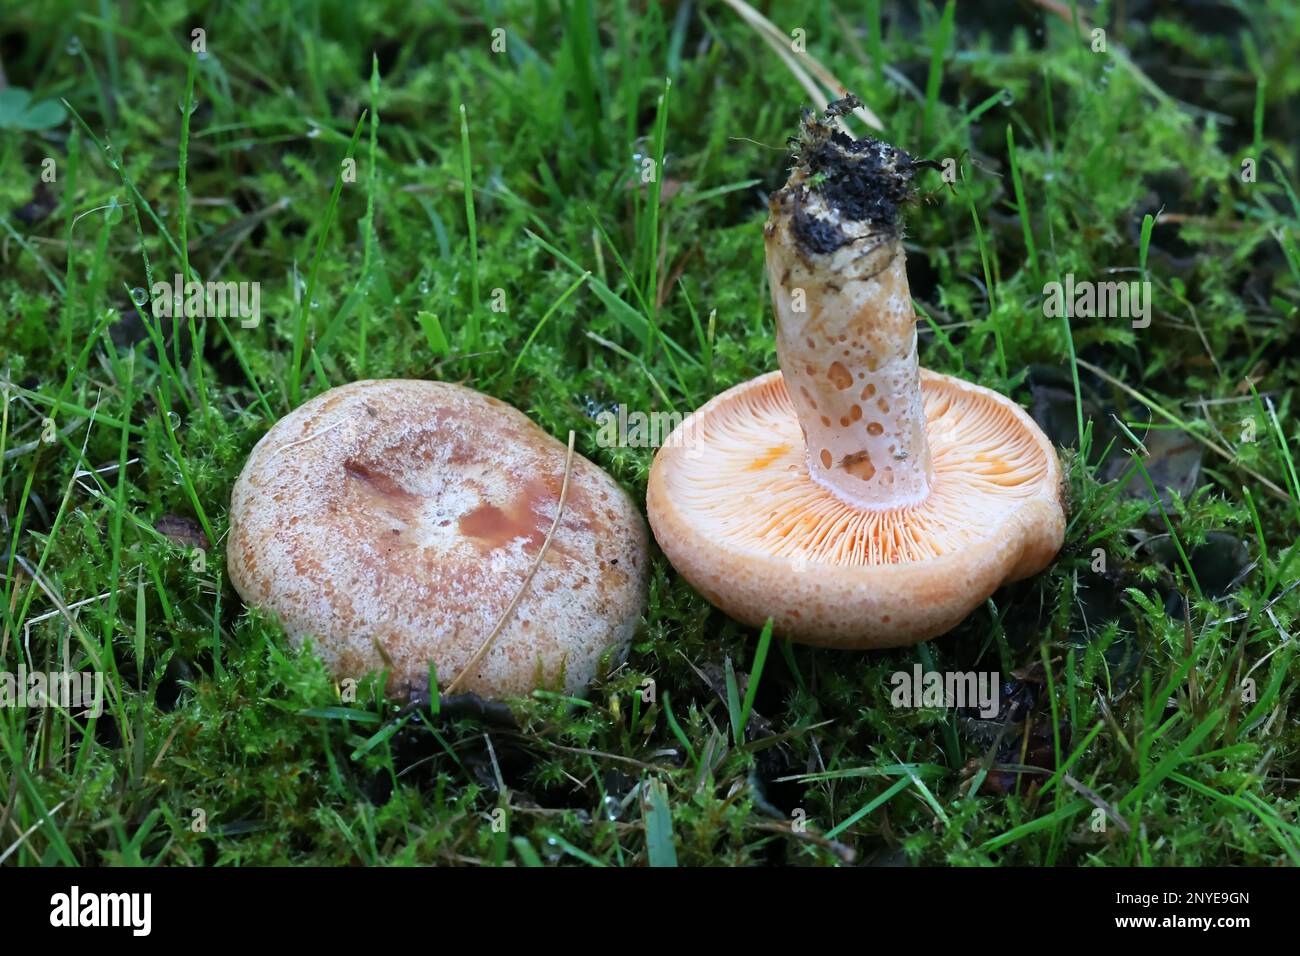 Lactarius deliciosus, commonly known as the saffron milkcap or red pine mushroom, wild fungus from Finland Stock Photo